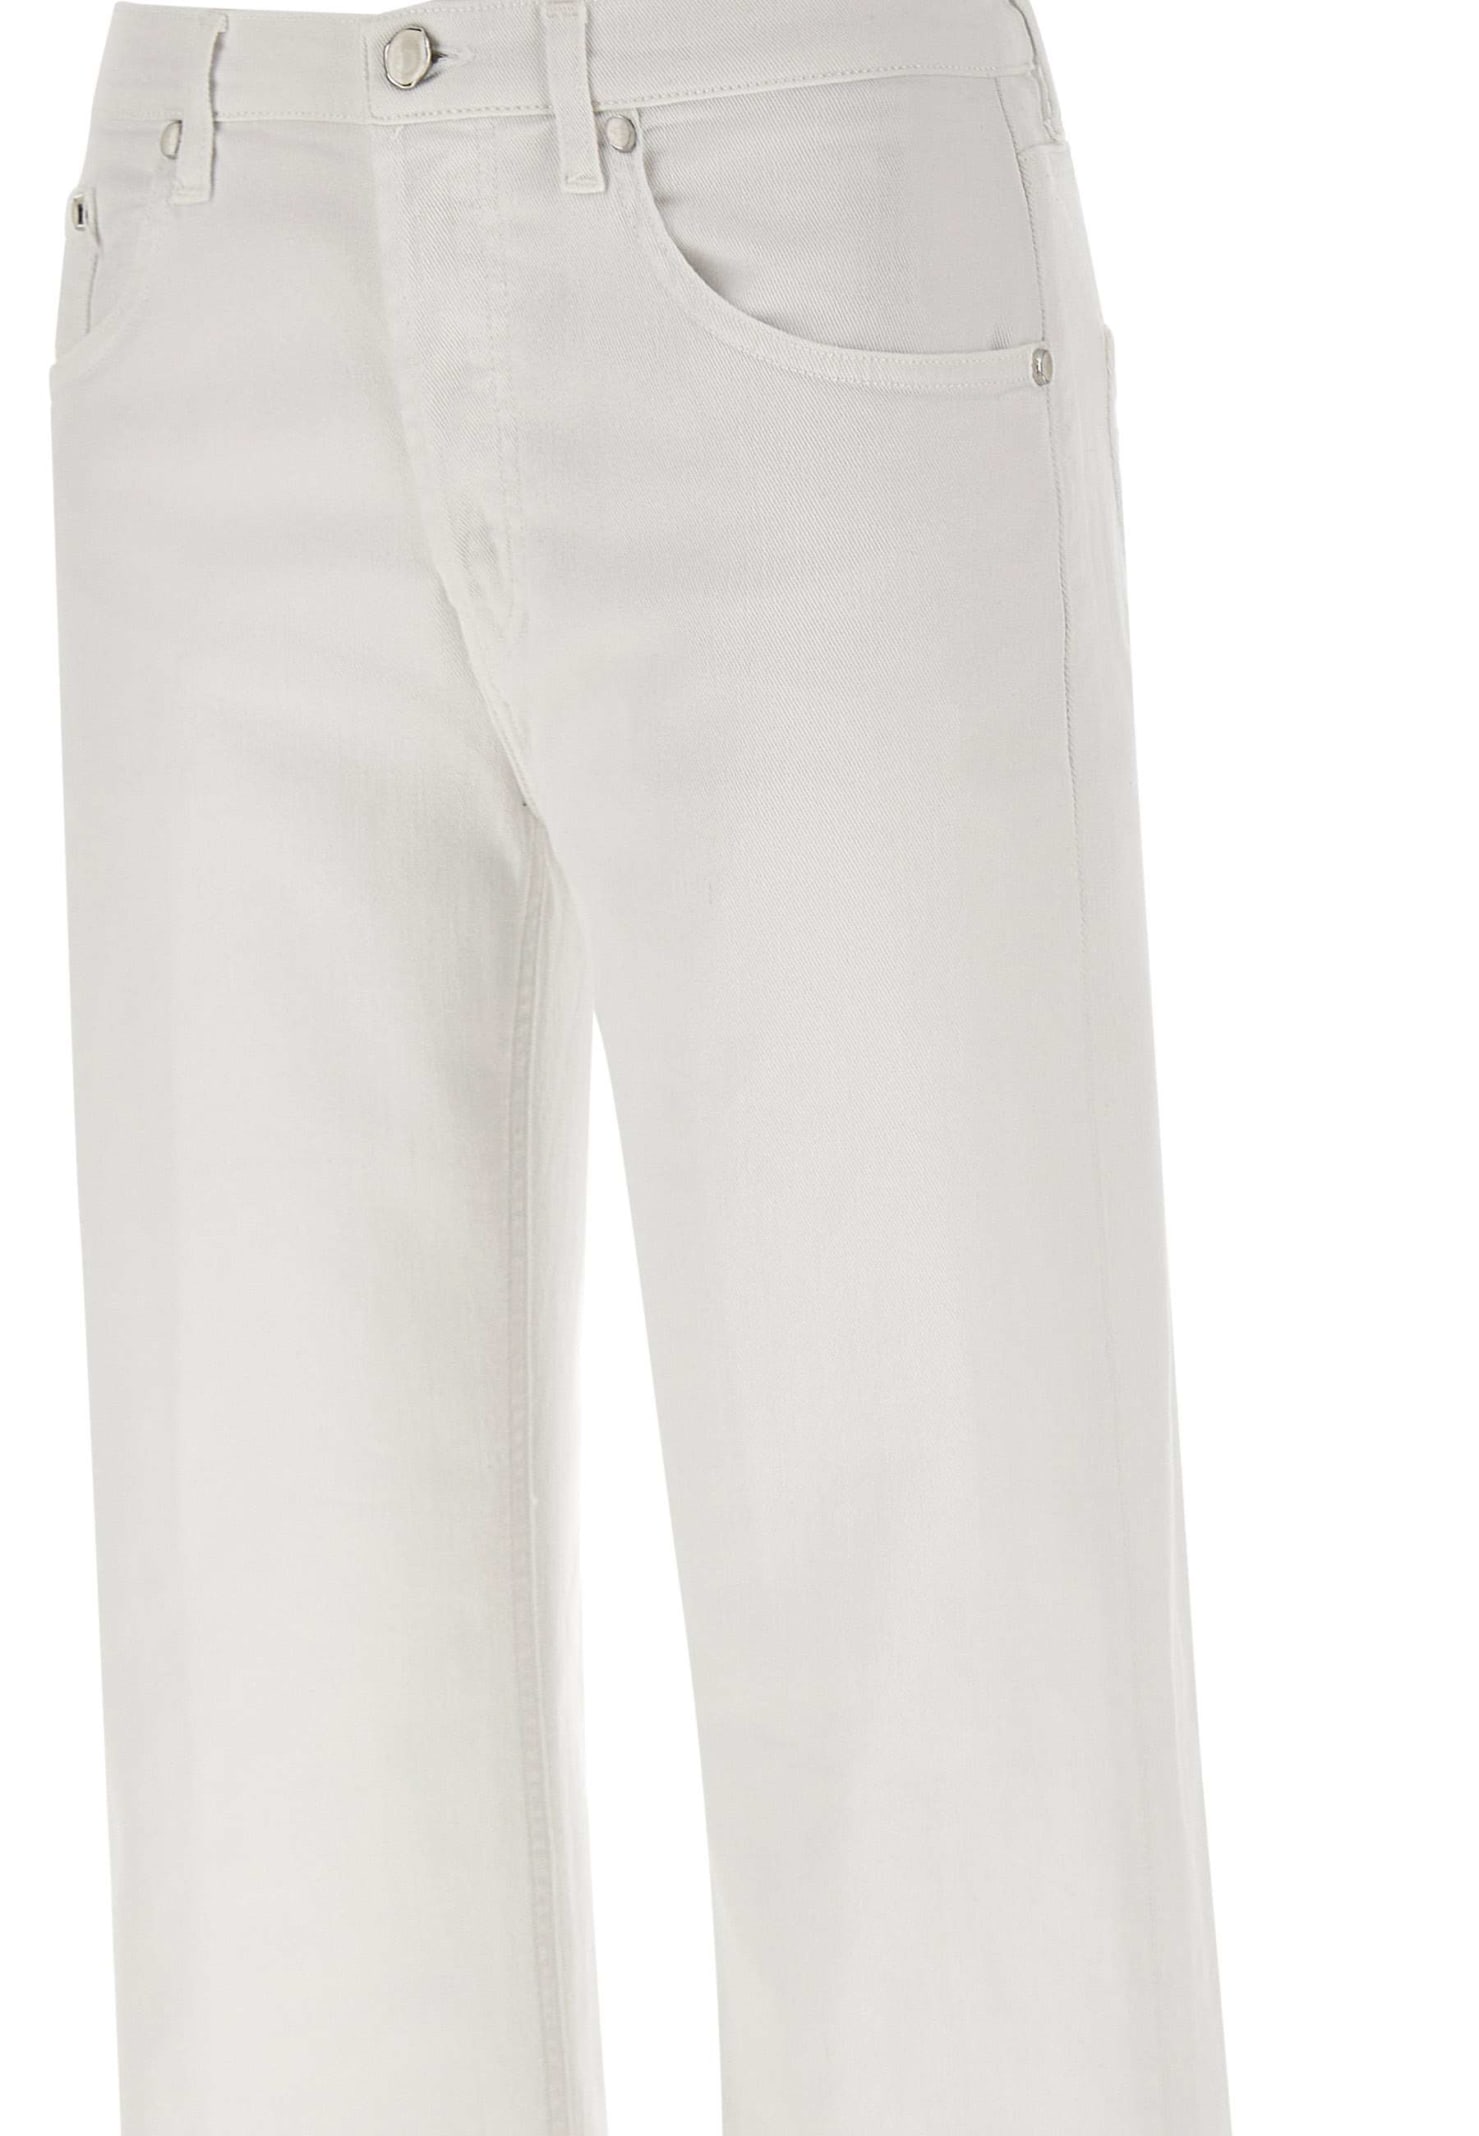 Shop Dondup Jacklyn Cotton Jeans In White